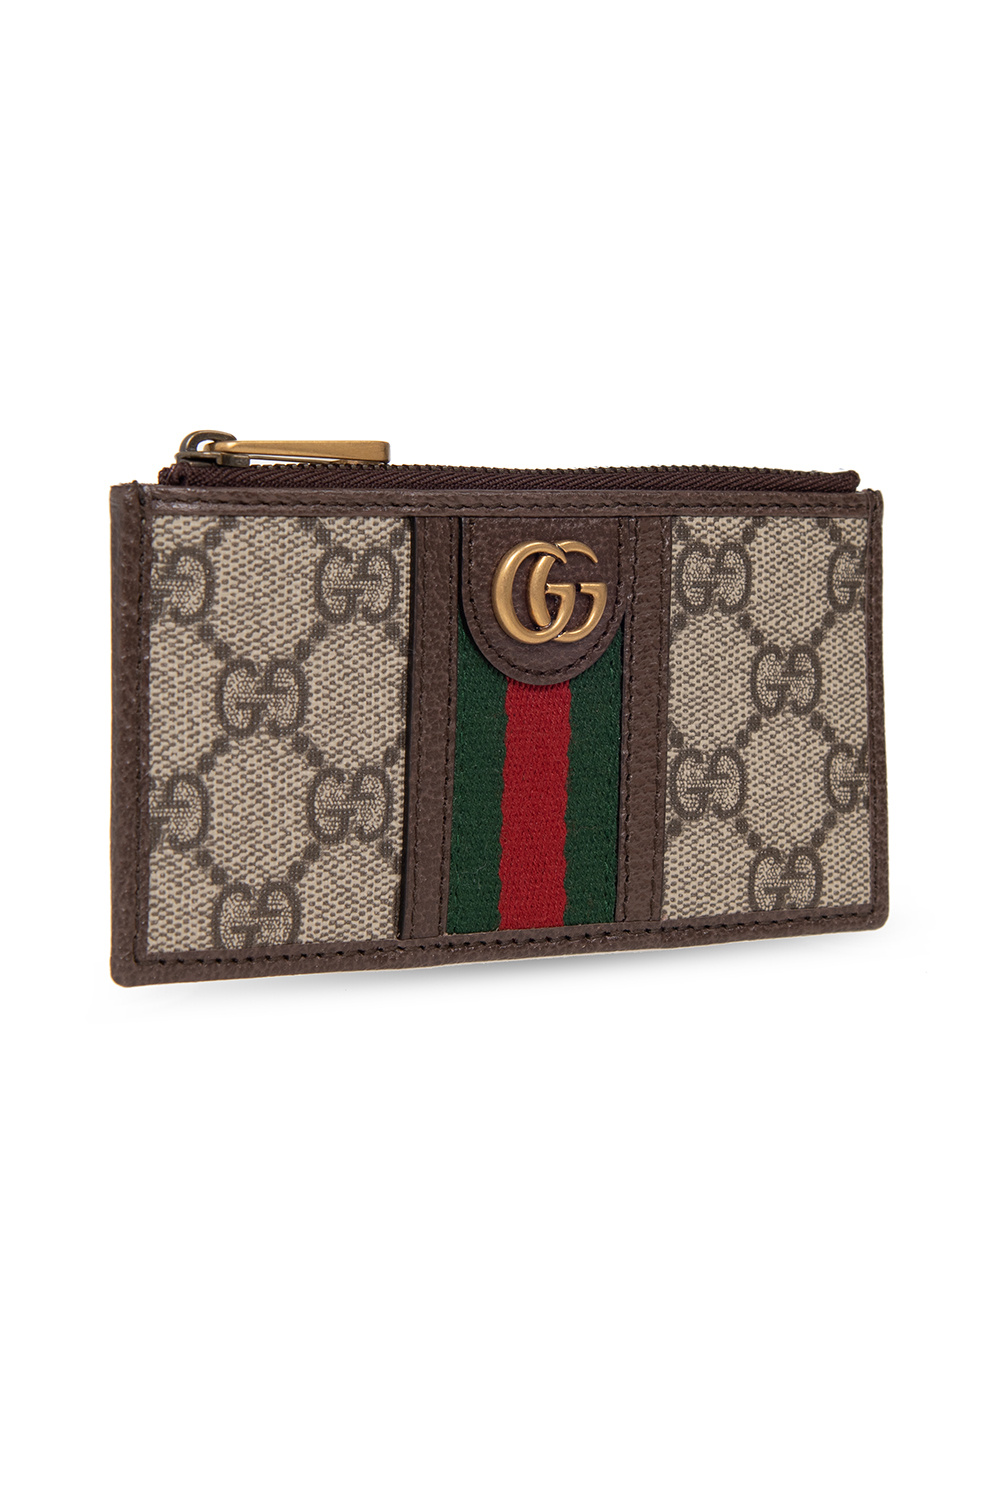 GUCCI Guccisima Wallet in Brown - More Than You Can Imagine